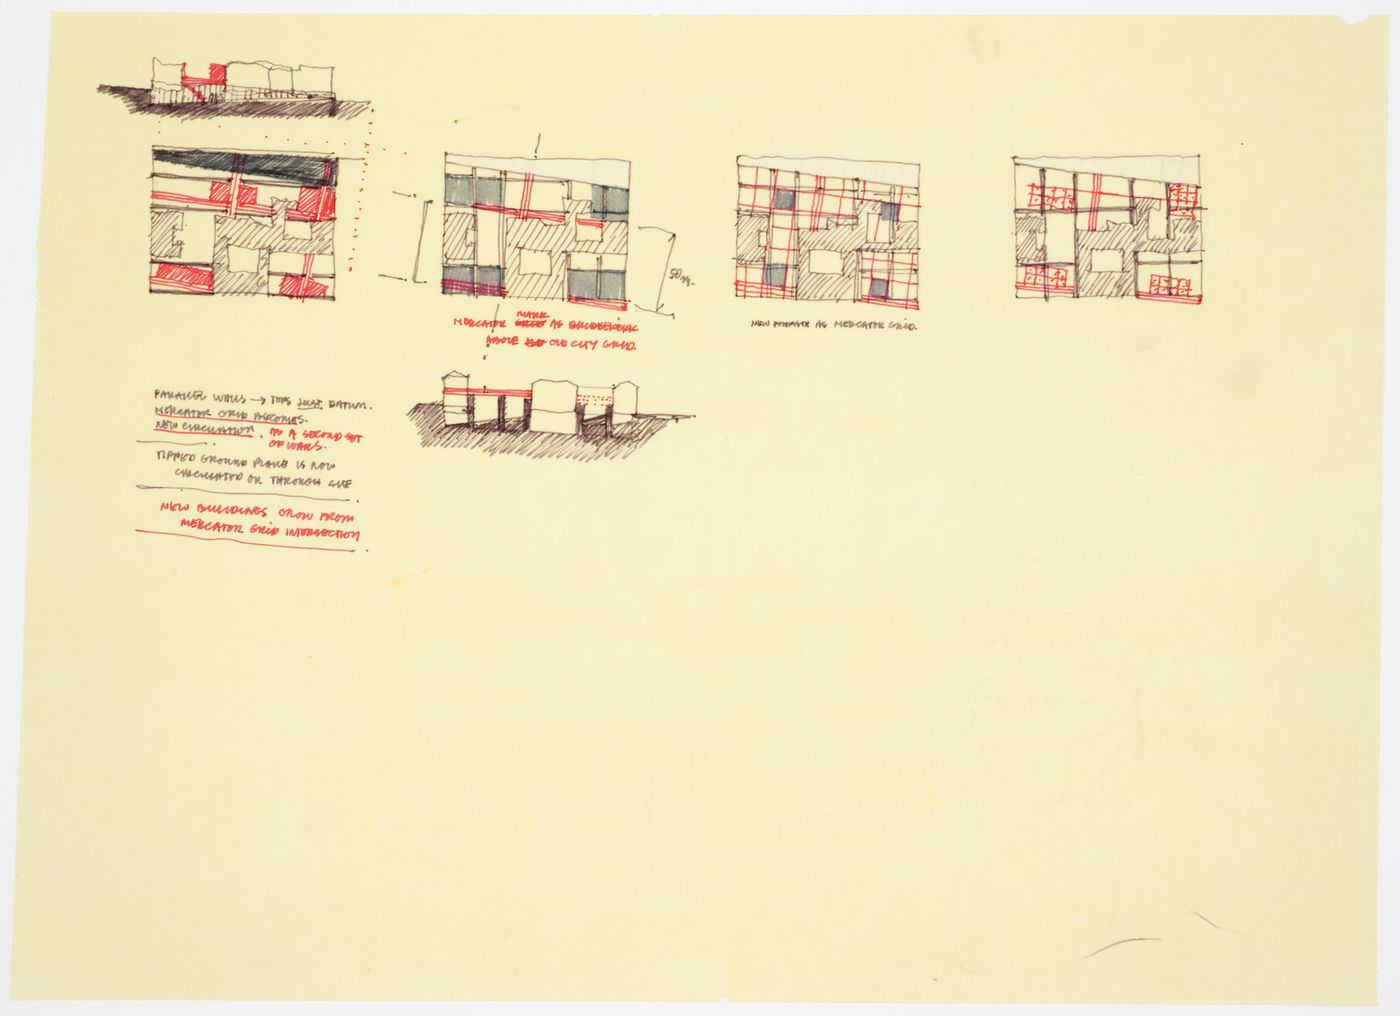 Conceptual drawings for IBA project, West Berlin (now Berlin), West Germany (now Germany)